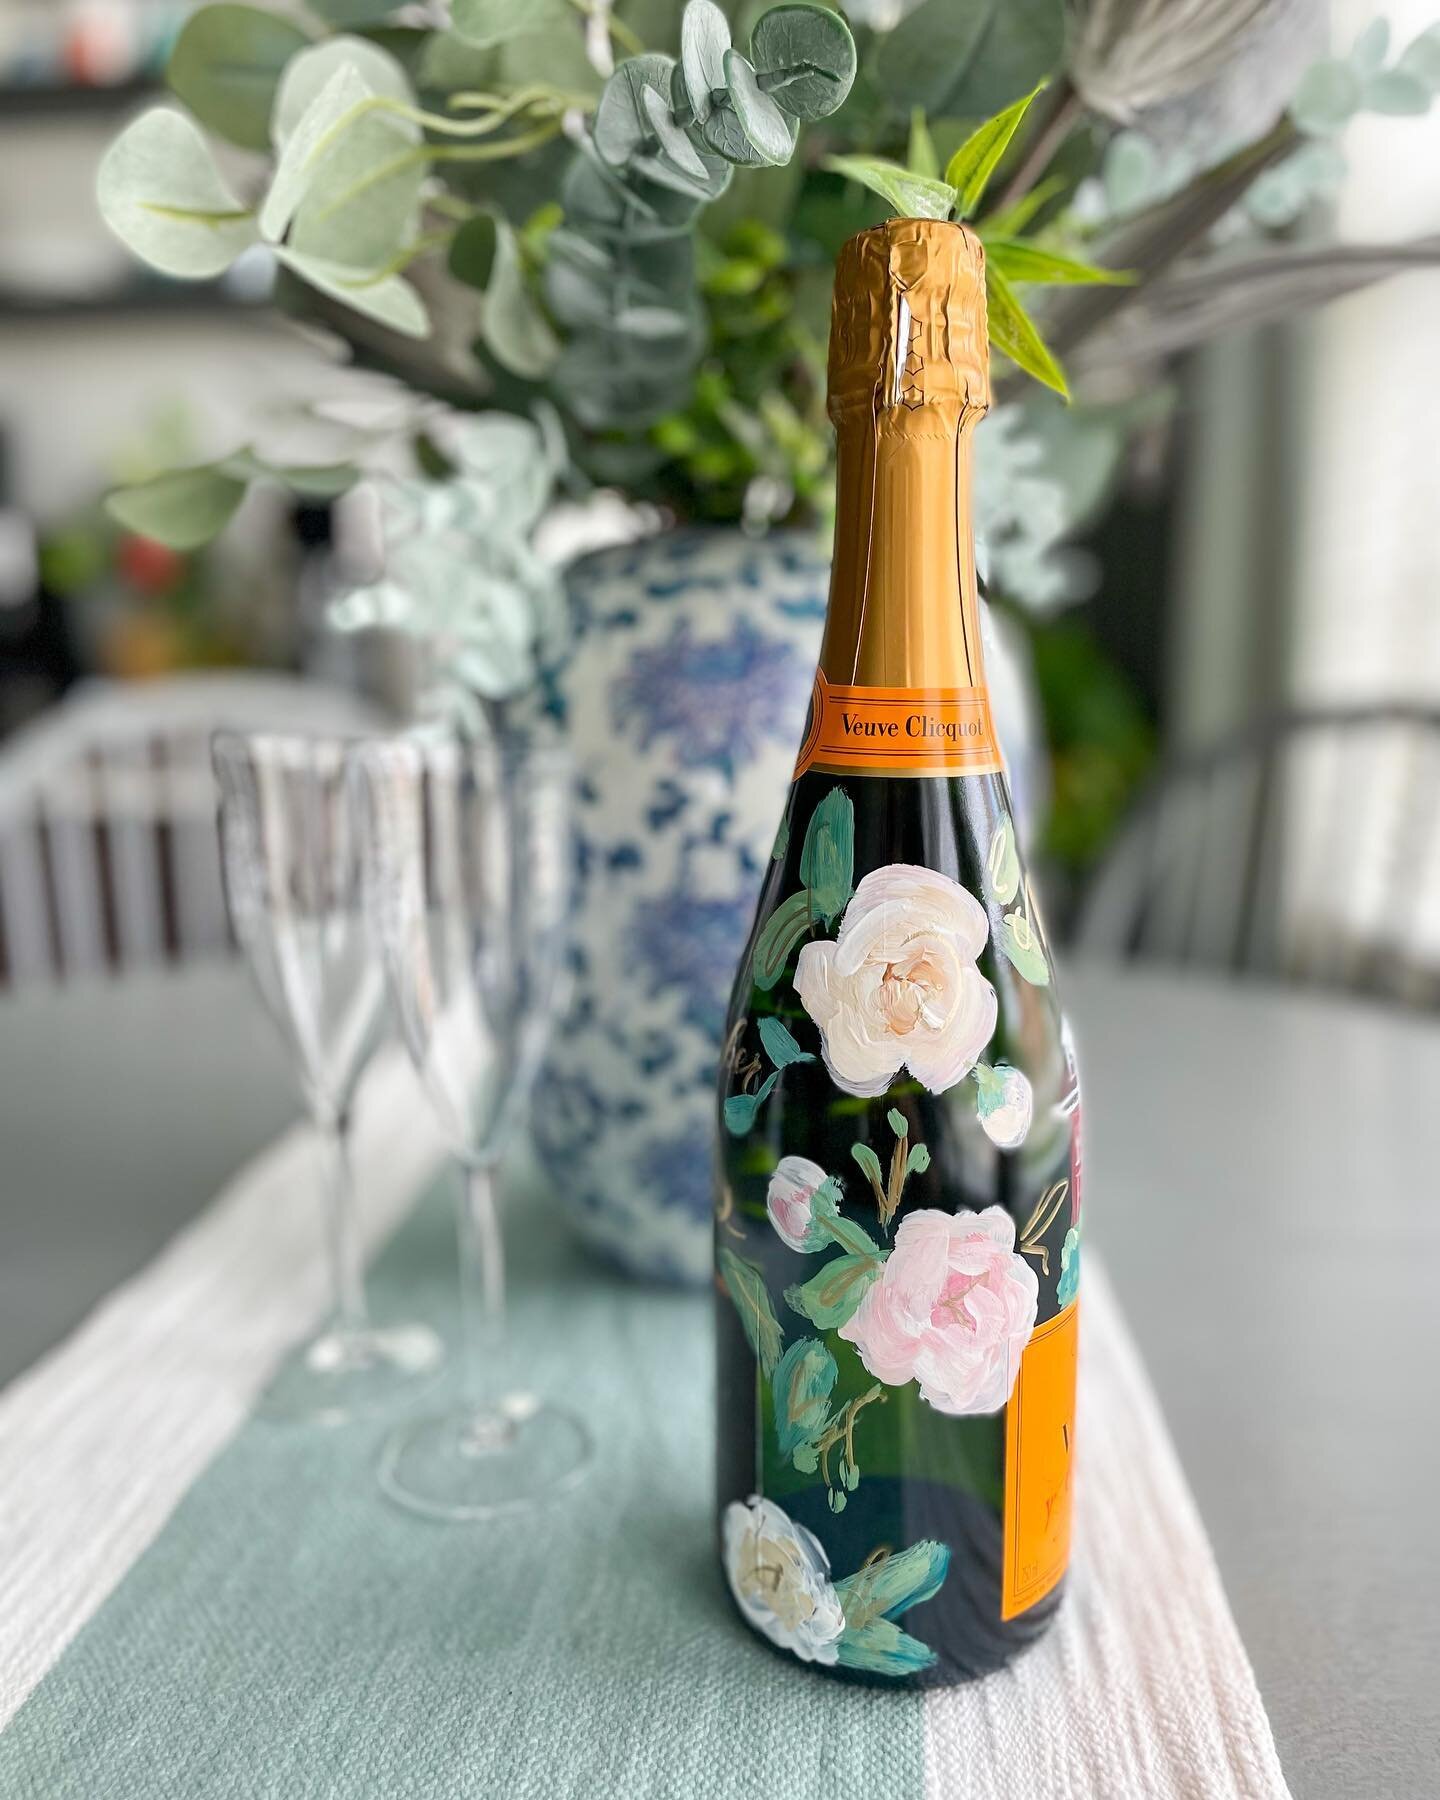 Swipe to see how we included the beautiful venue, Homestead Manor in Franklin, TN, on this bottle! 😍

#franklintn #franklintnwedding #southerncharm #southernwedding #southernbride #paintedchampagnebottle #veuveclicquot #artistsoninstagram #nashville